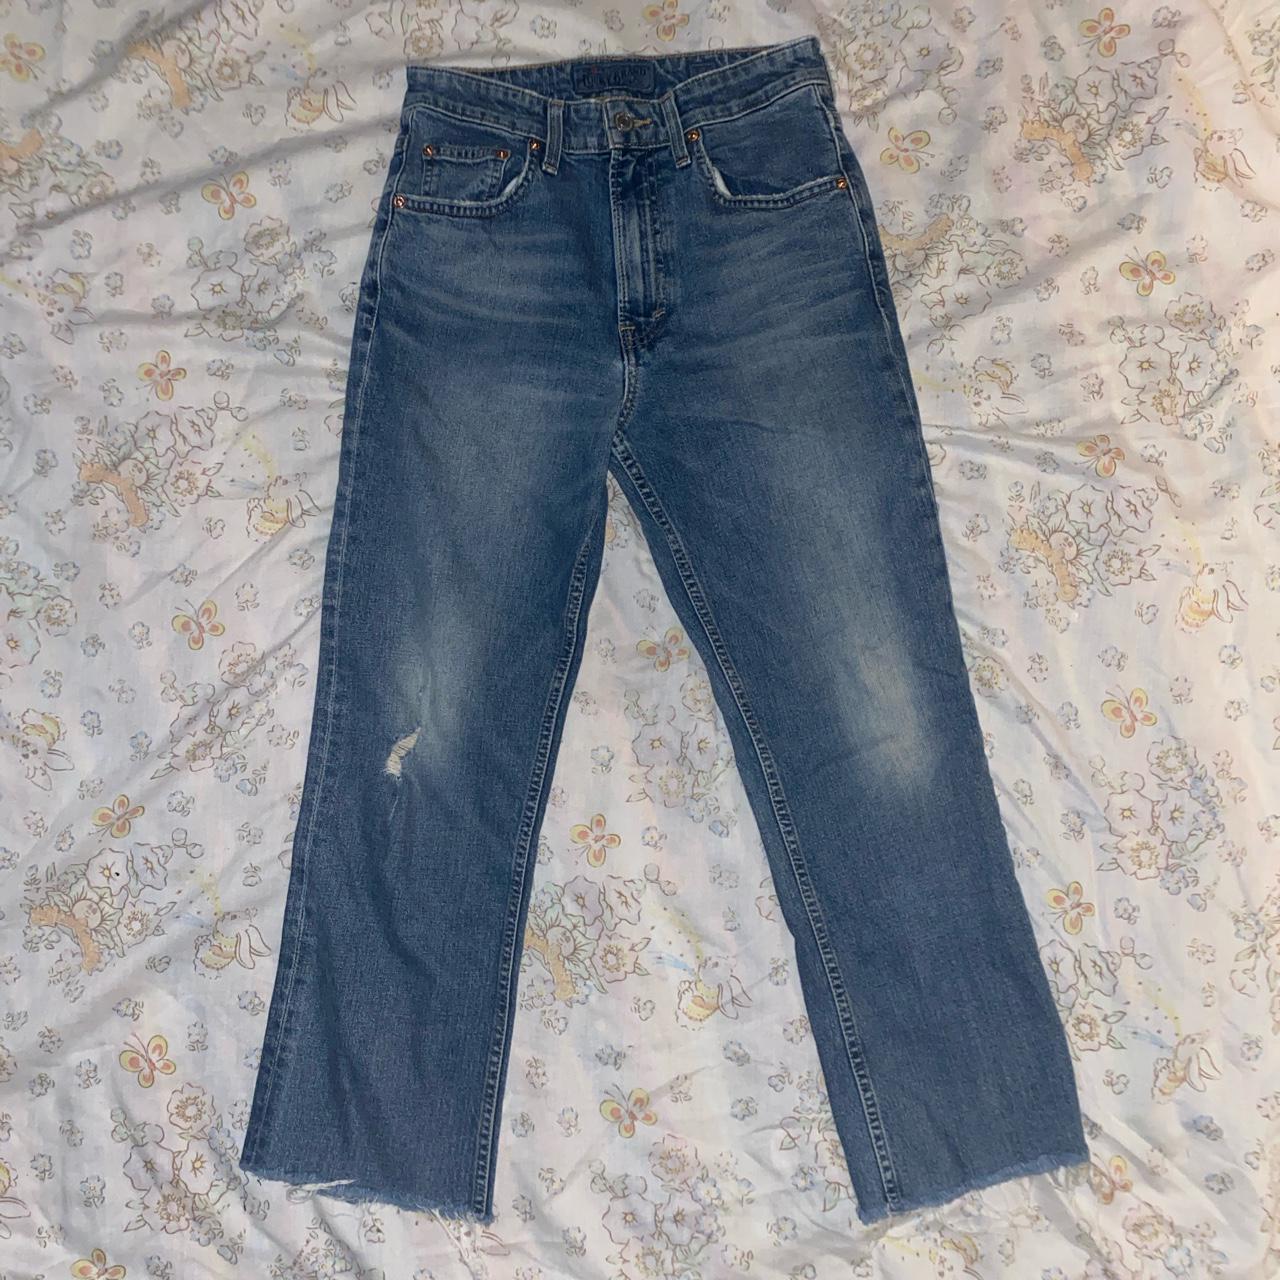 Lucky Brand Women's Blue and White Jeans